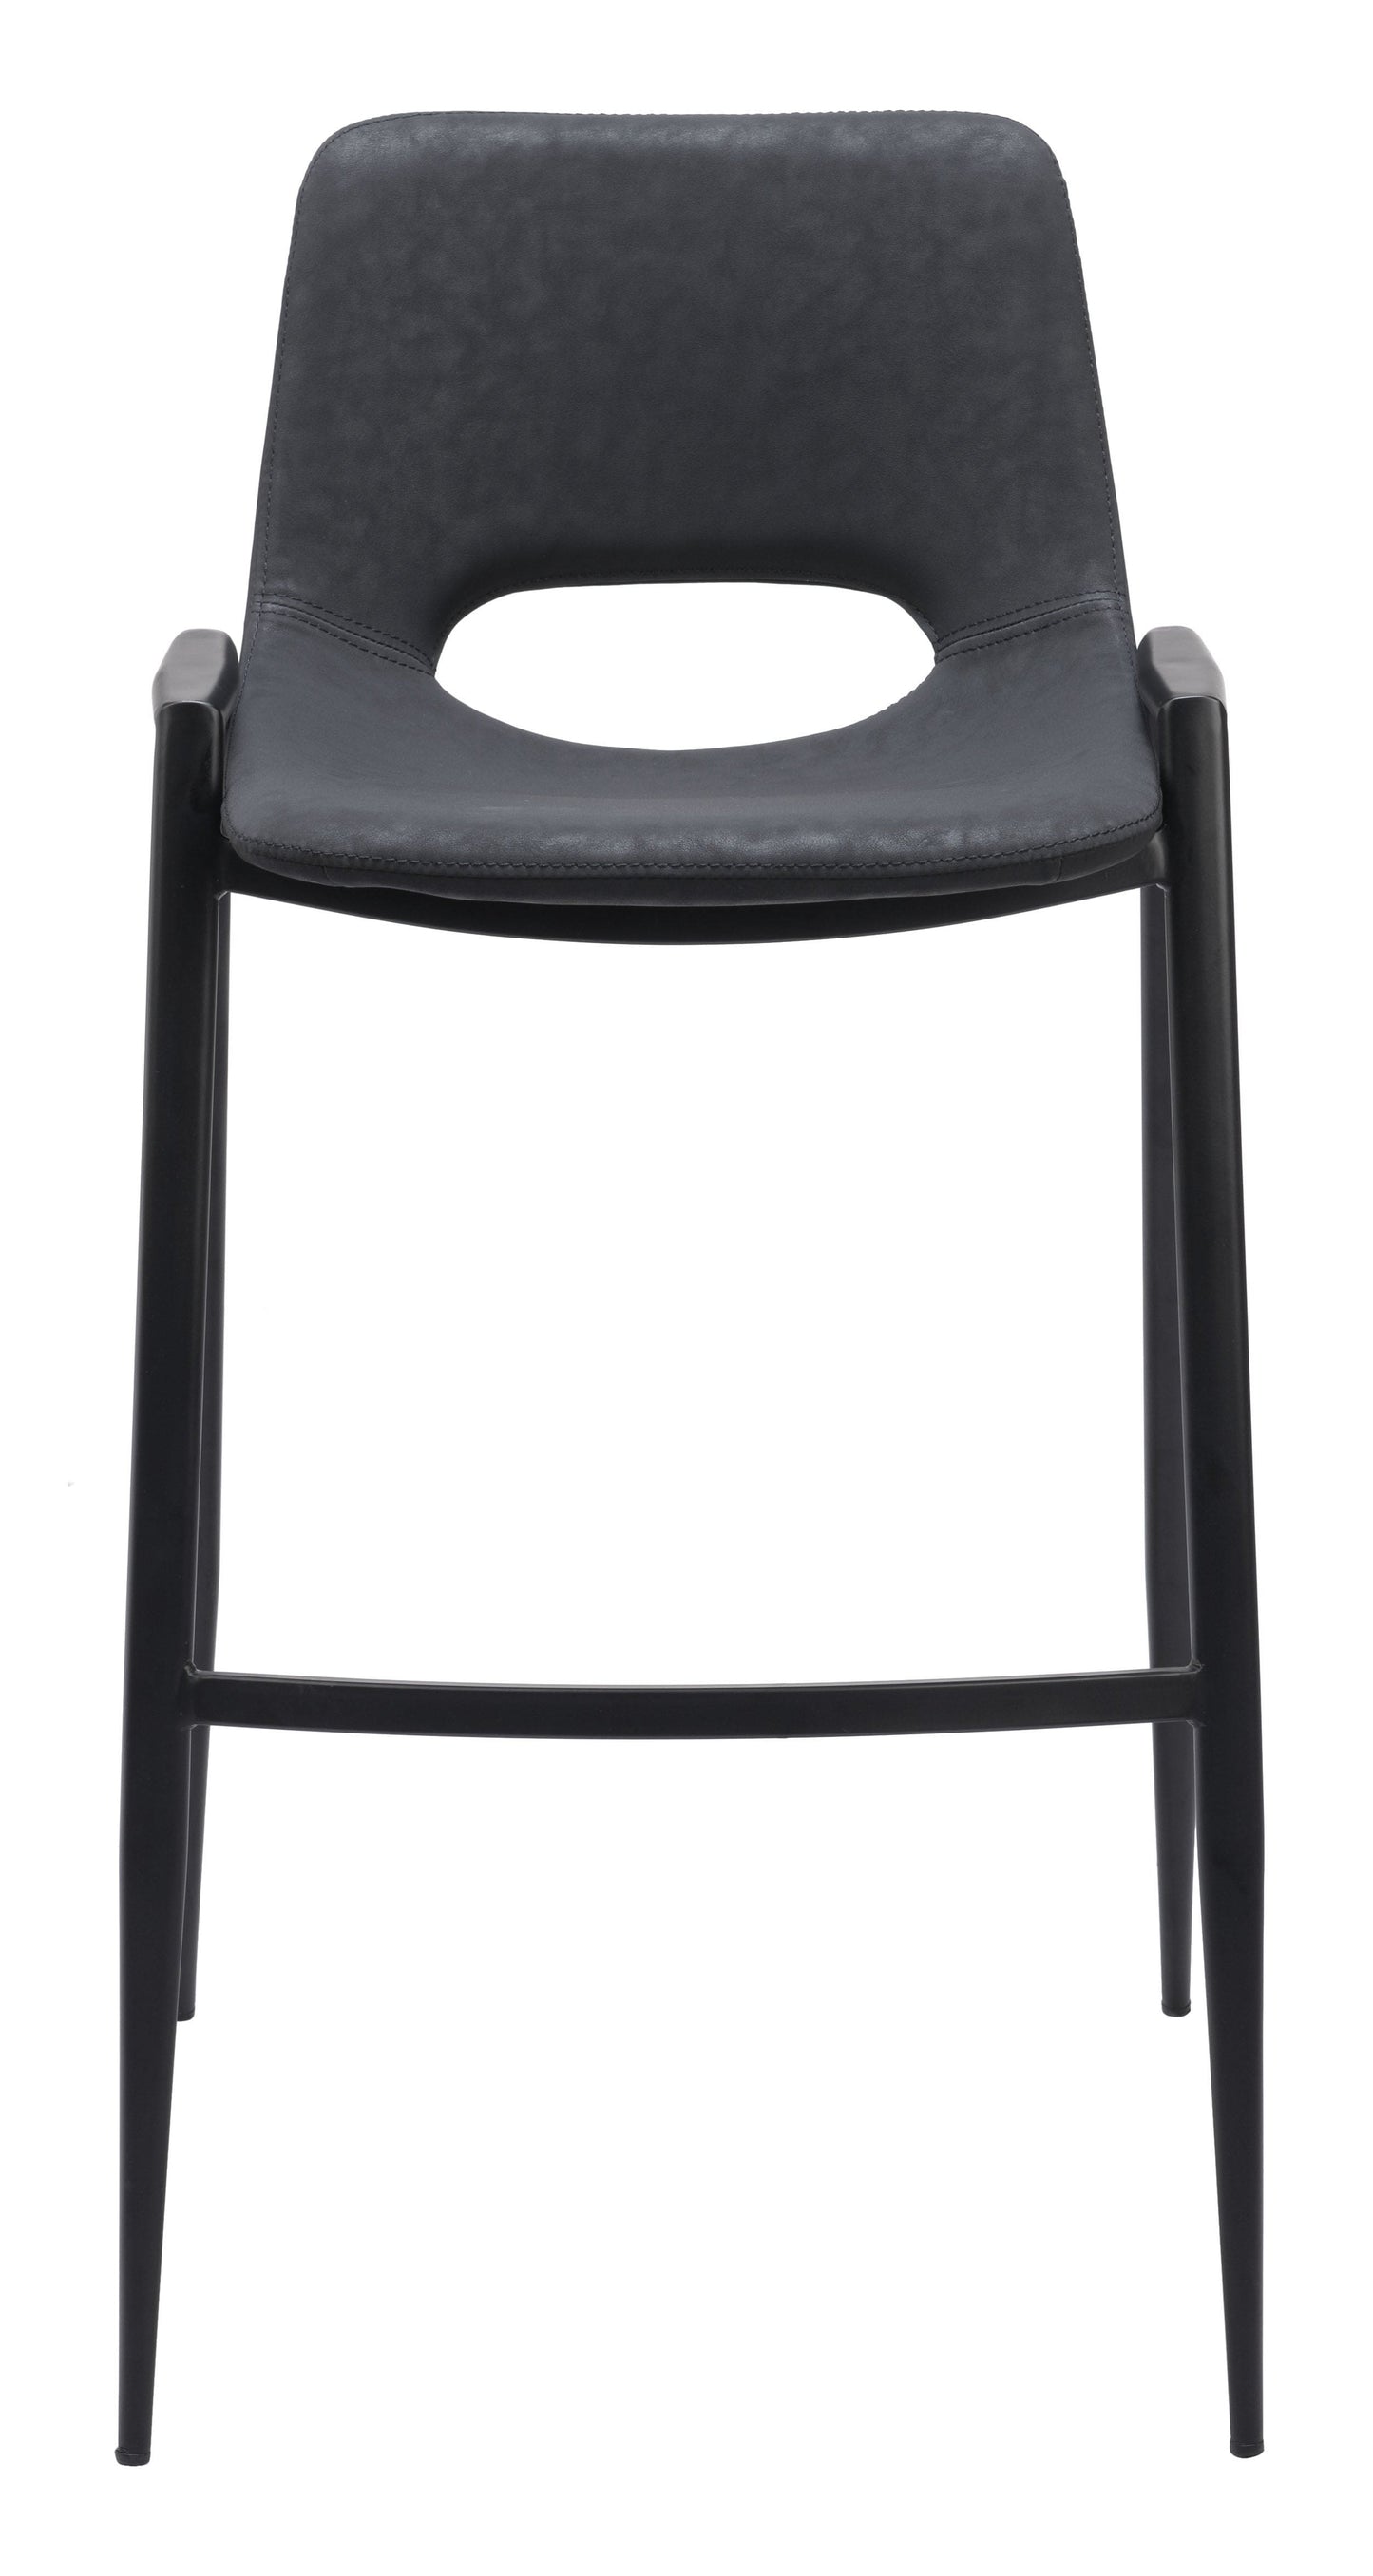 Front View of ZuoMod Stool